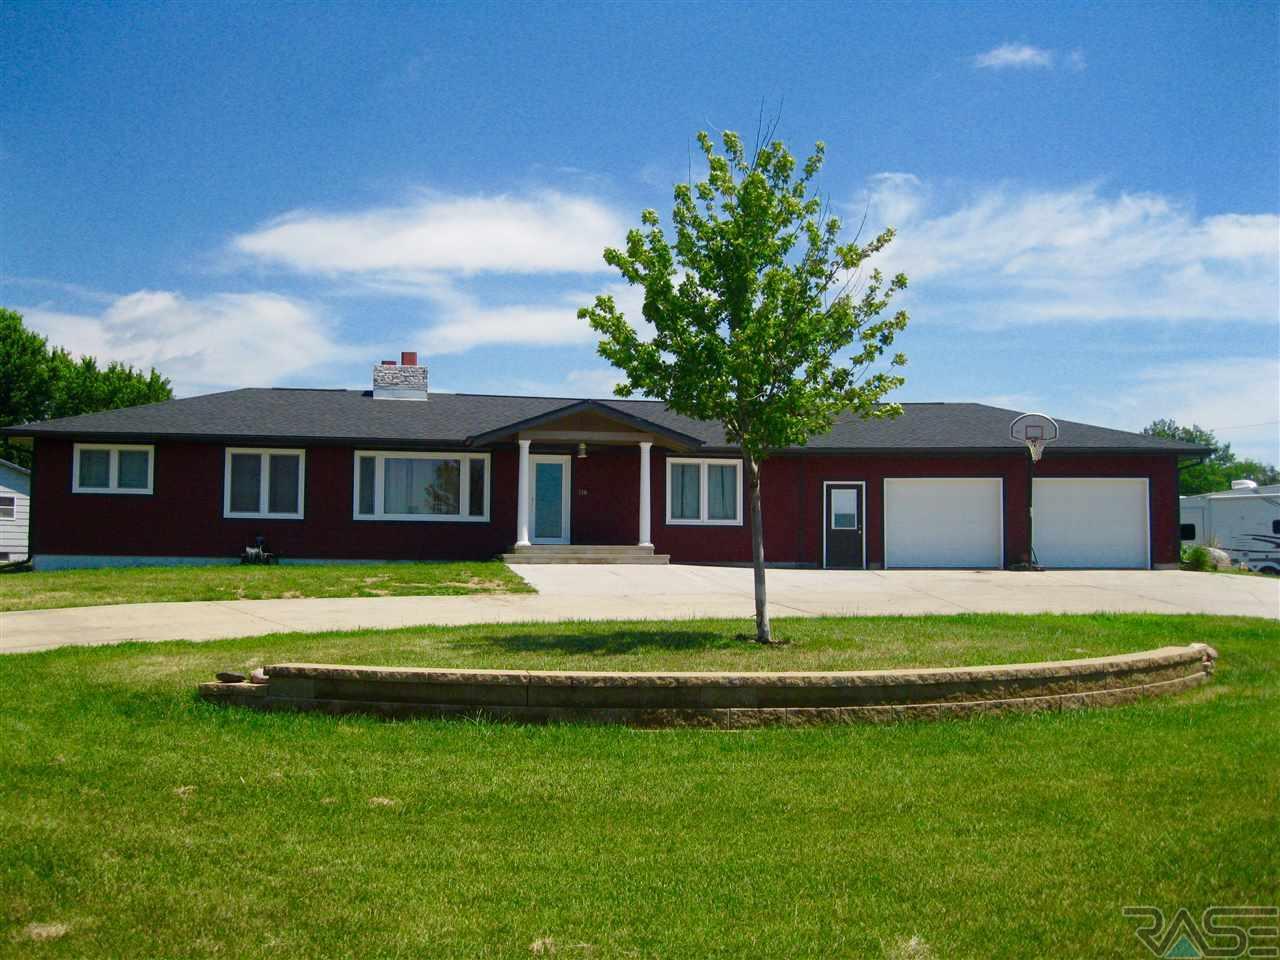 Check out this listing by EXIT Realty Sioux Empire!